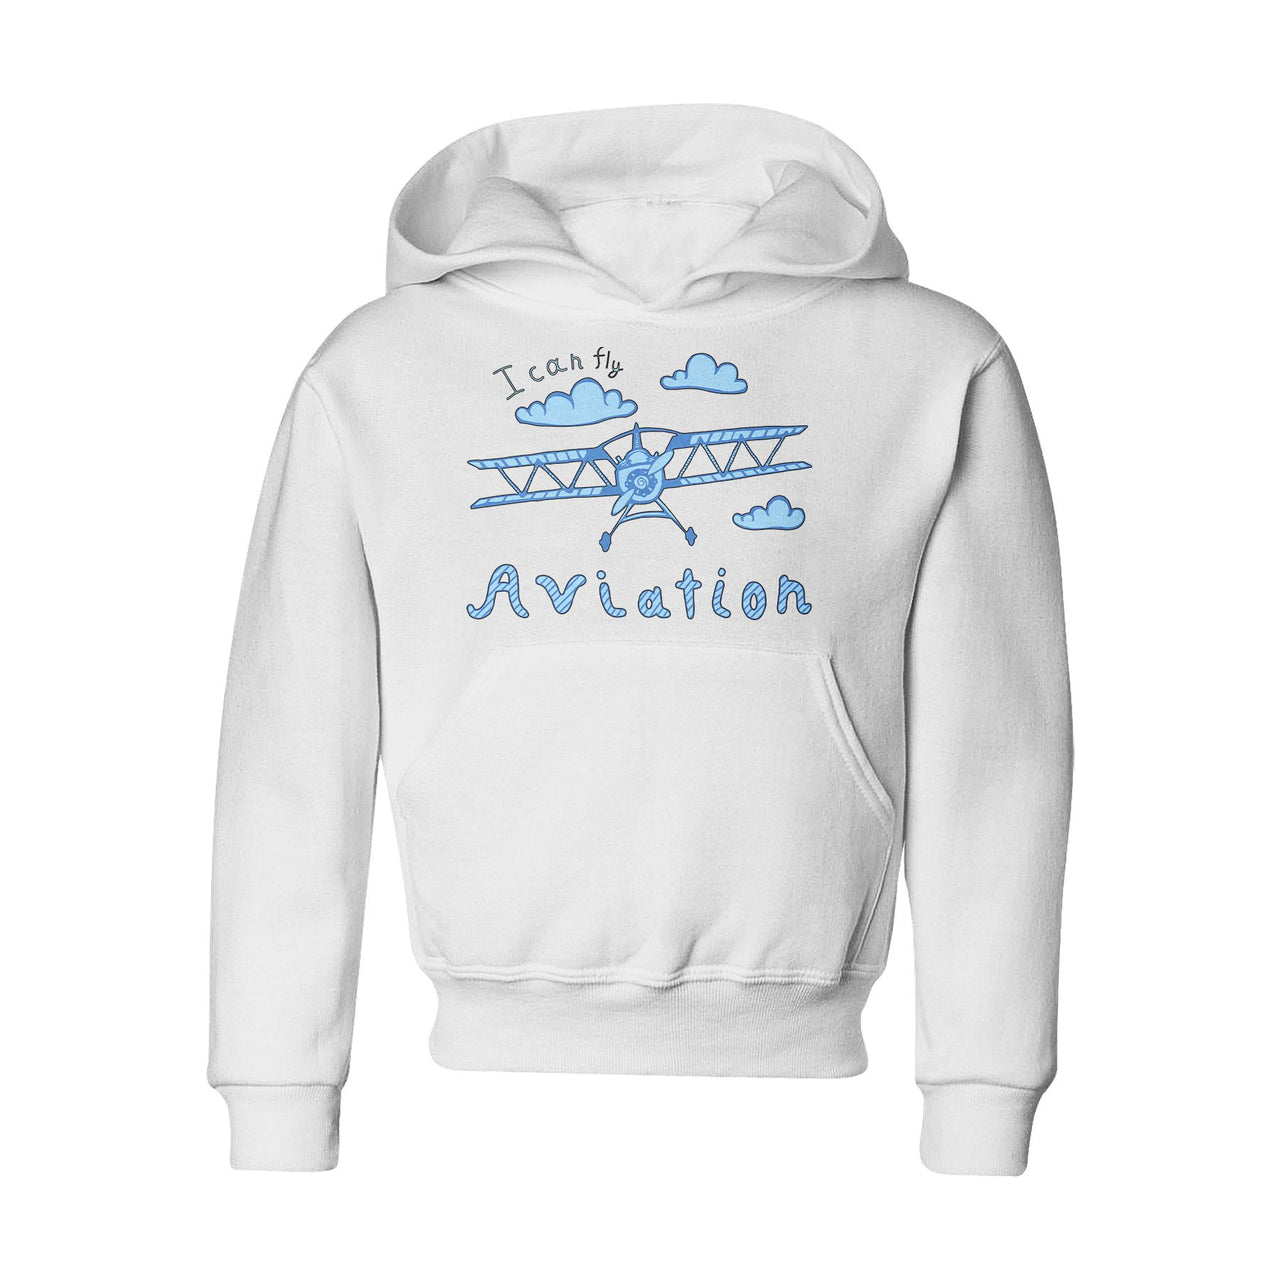 I Can Fly & Aviation Designed "CHILDREN" Hoodies